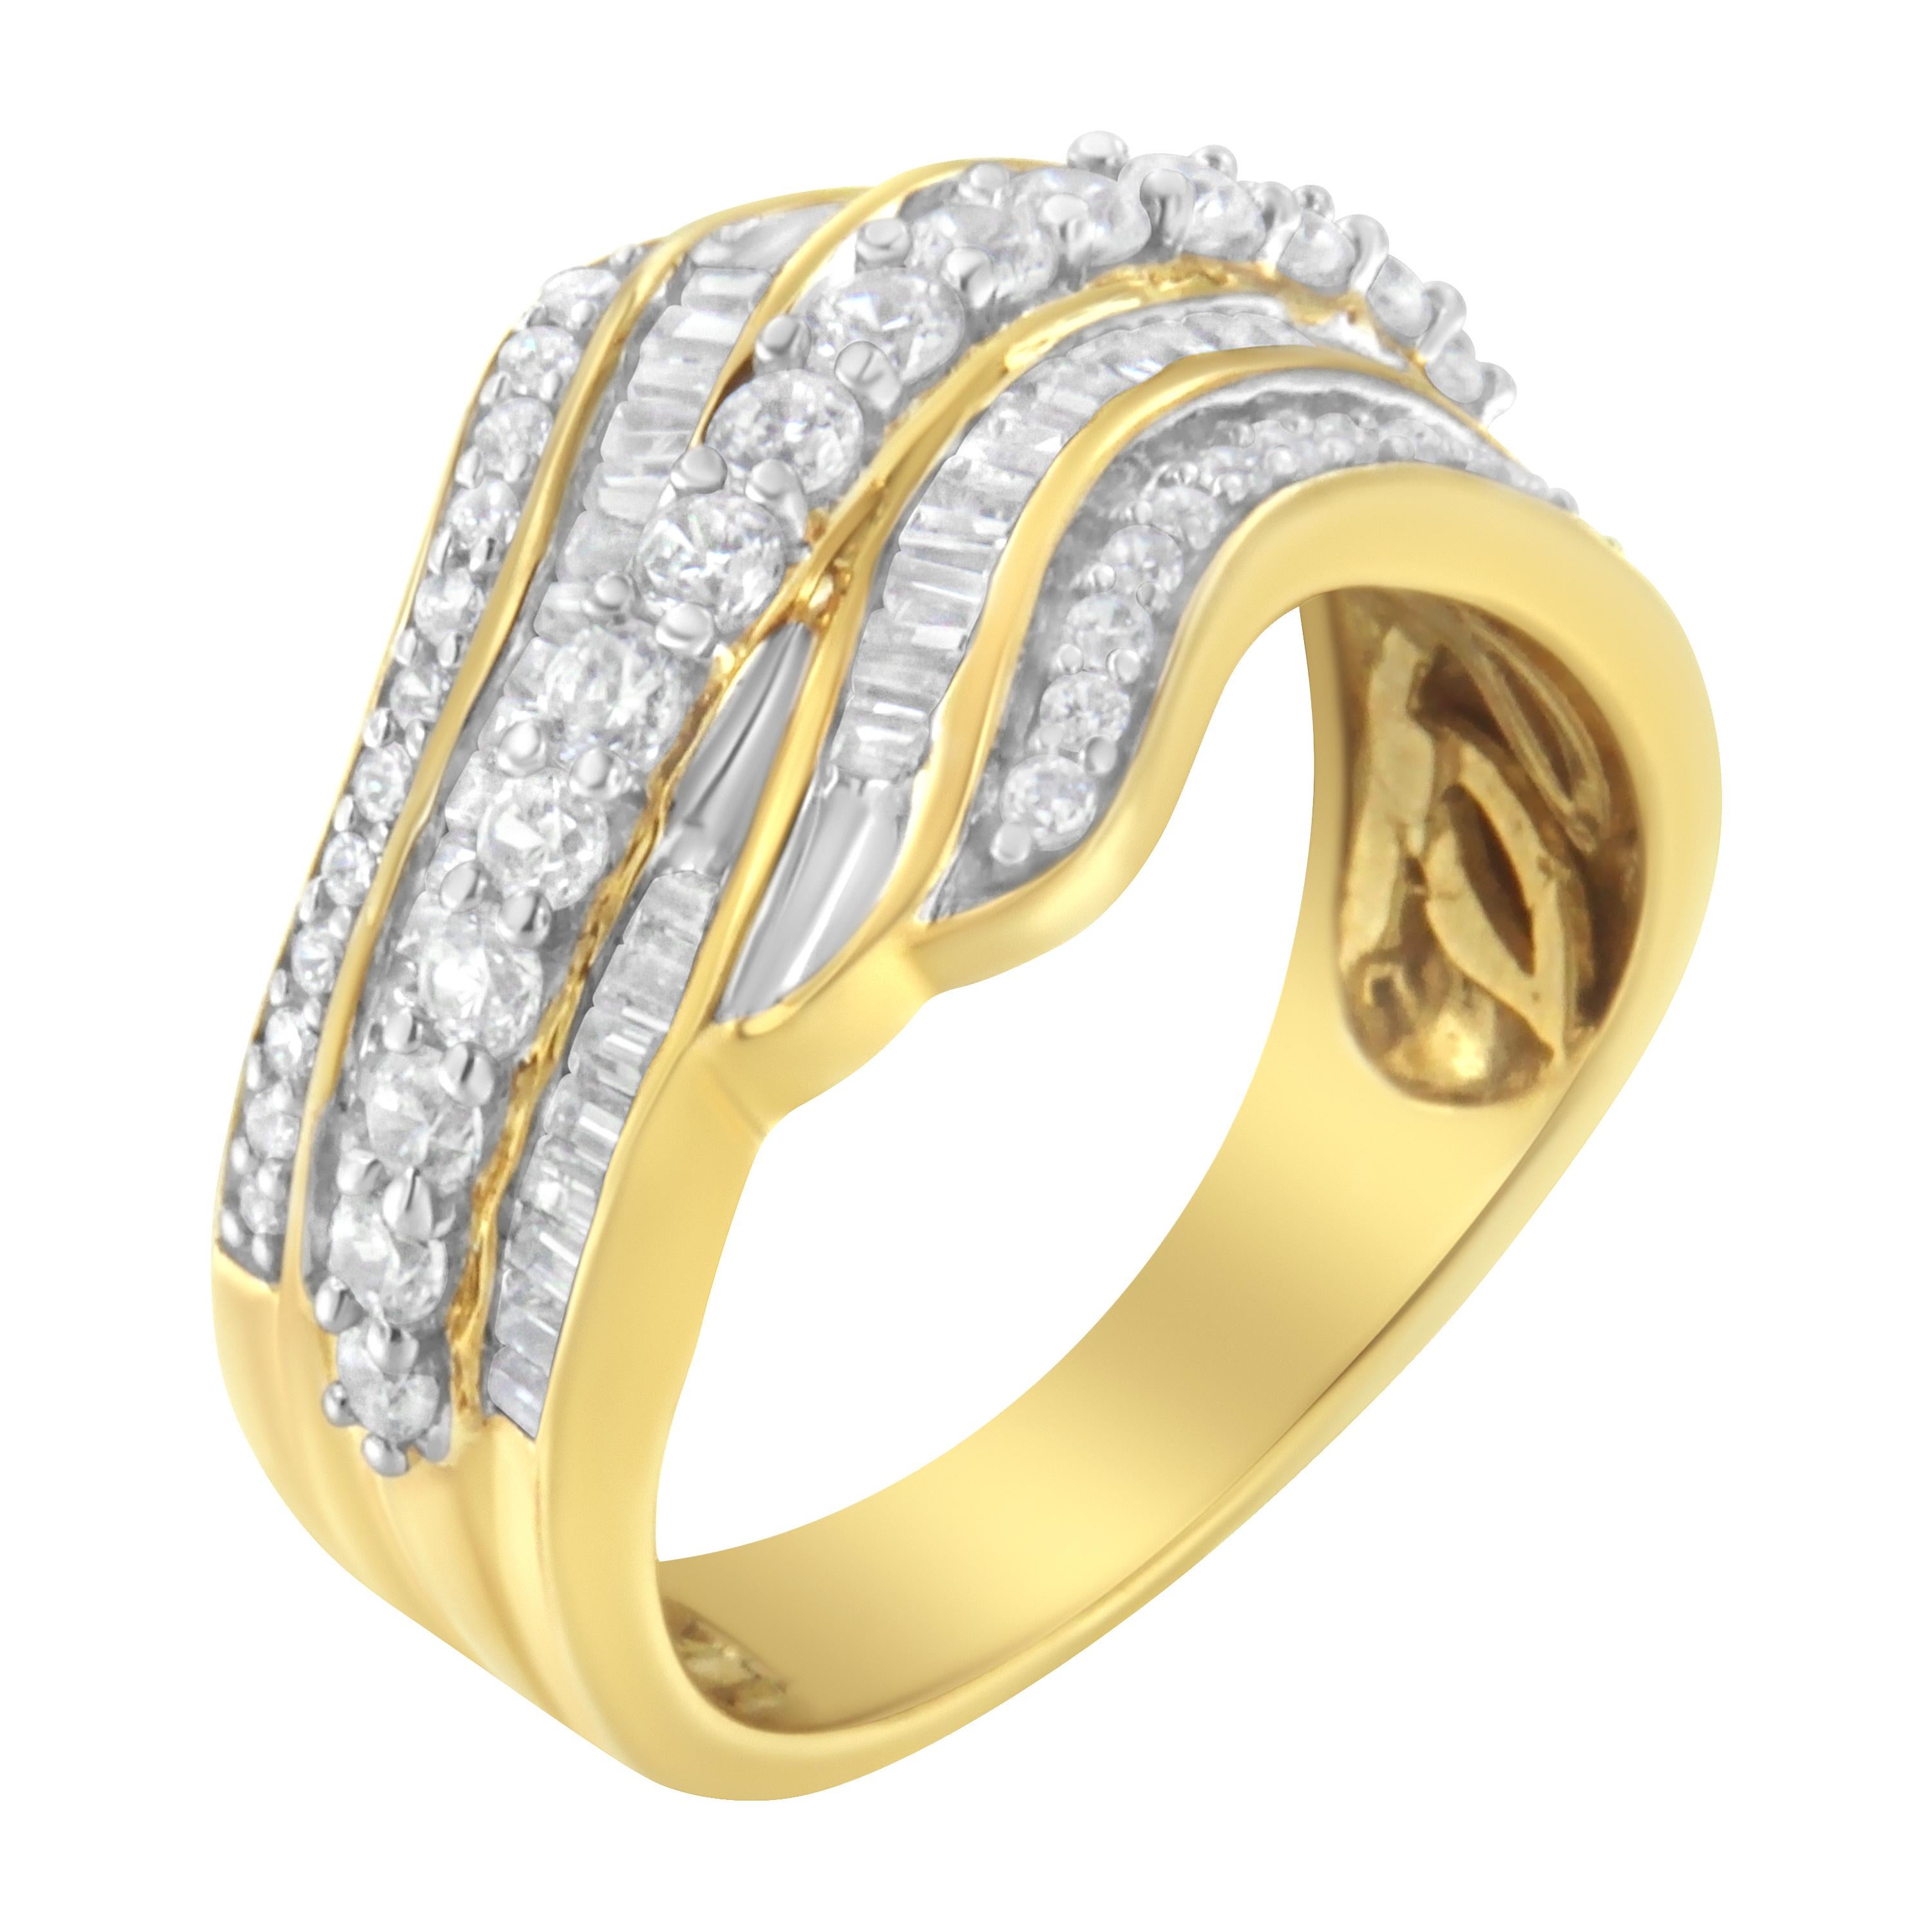 Crafted in warm 10k yellow gold, this bypassing ring features 1 cttw of diamonds. A ribbon inlaid in glimmering round cut diamonds sits at the center of the ring while additional rows studded with baguette and round cut diamonds overlap the center